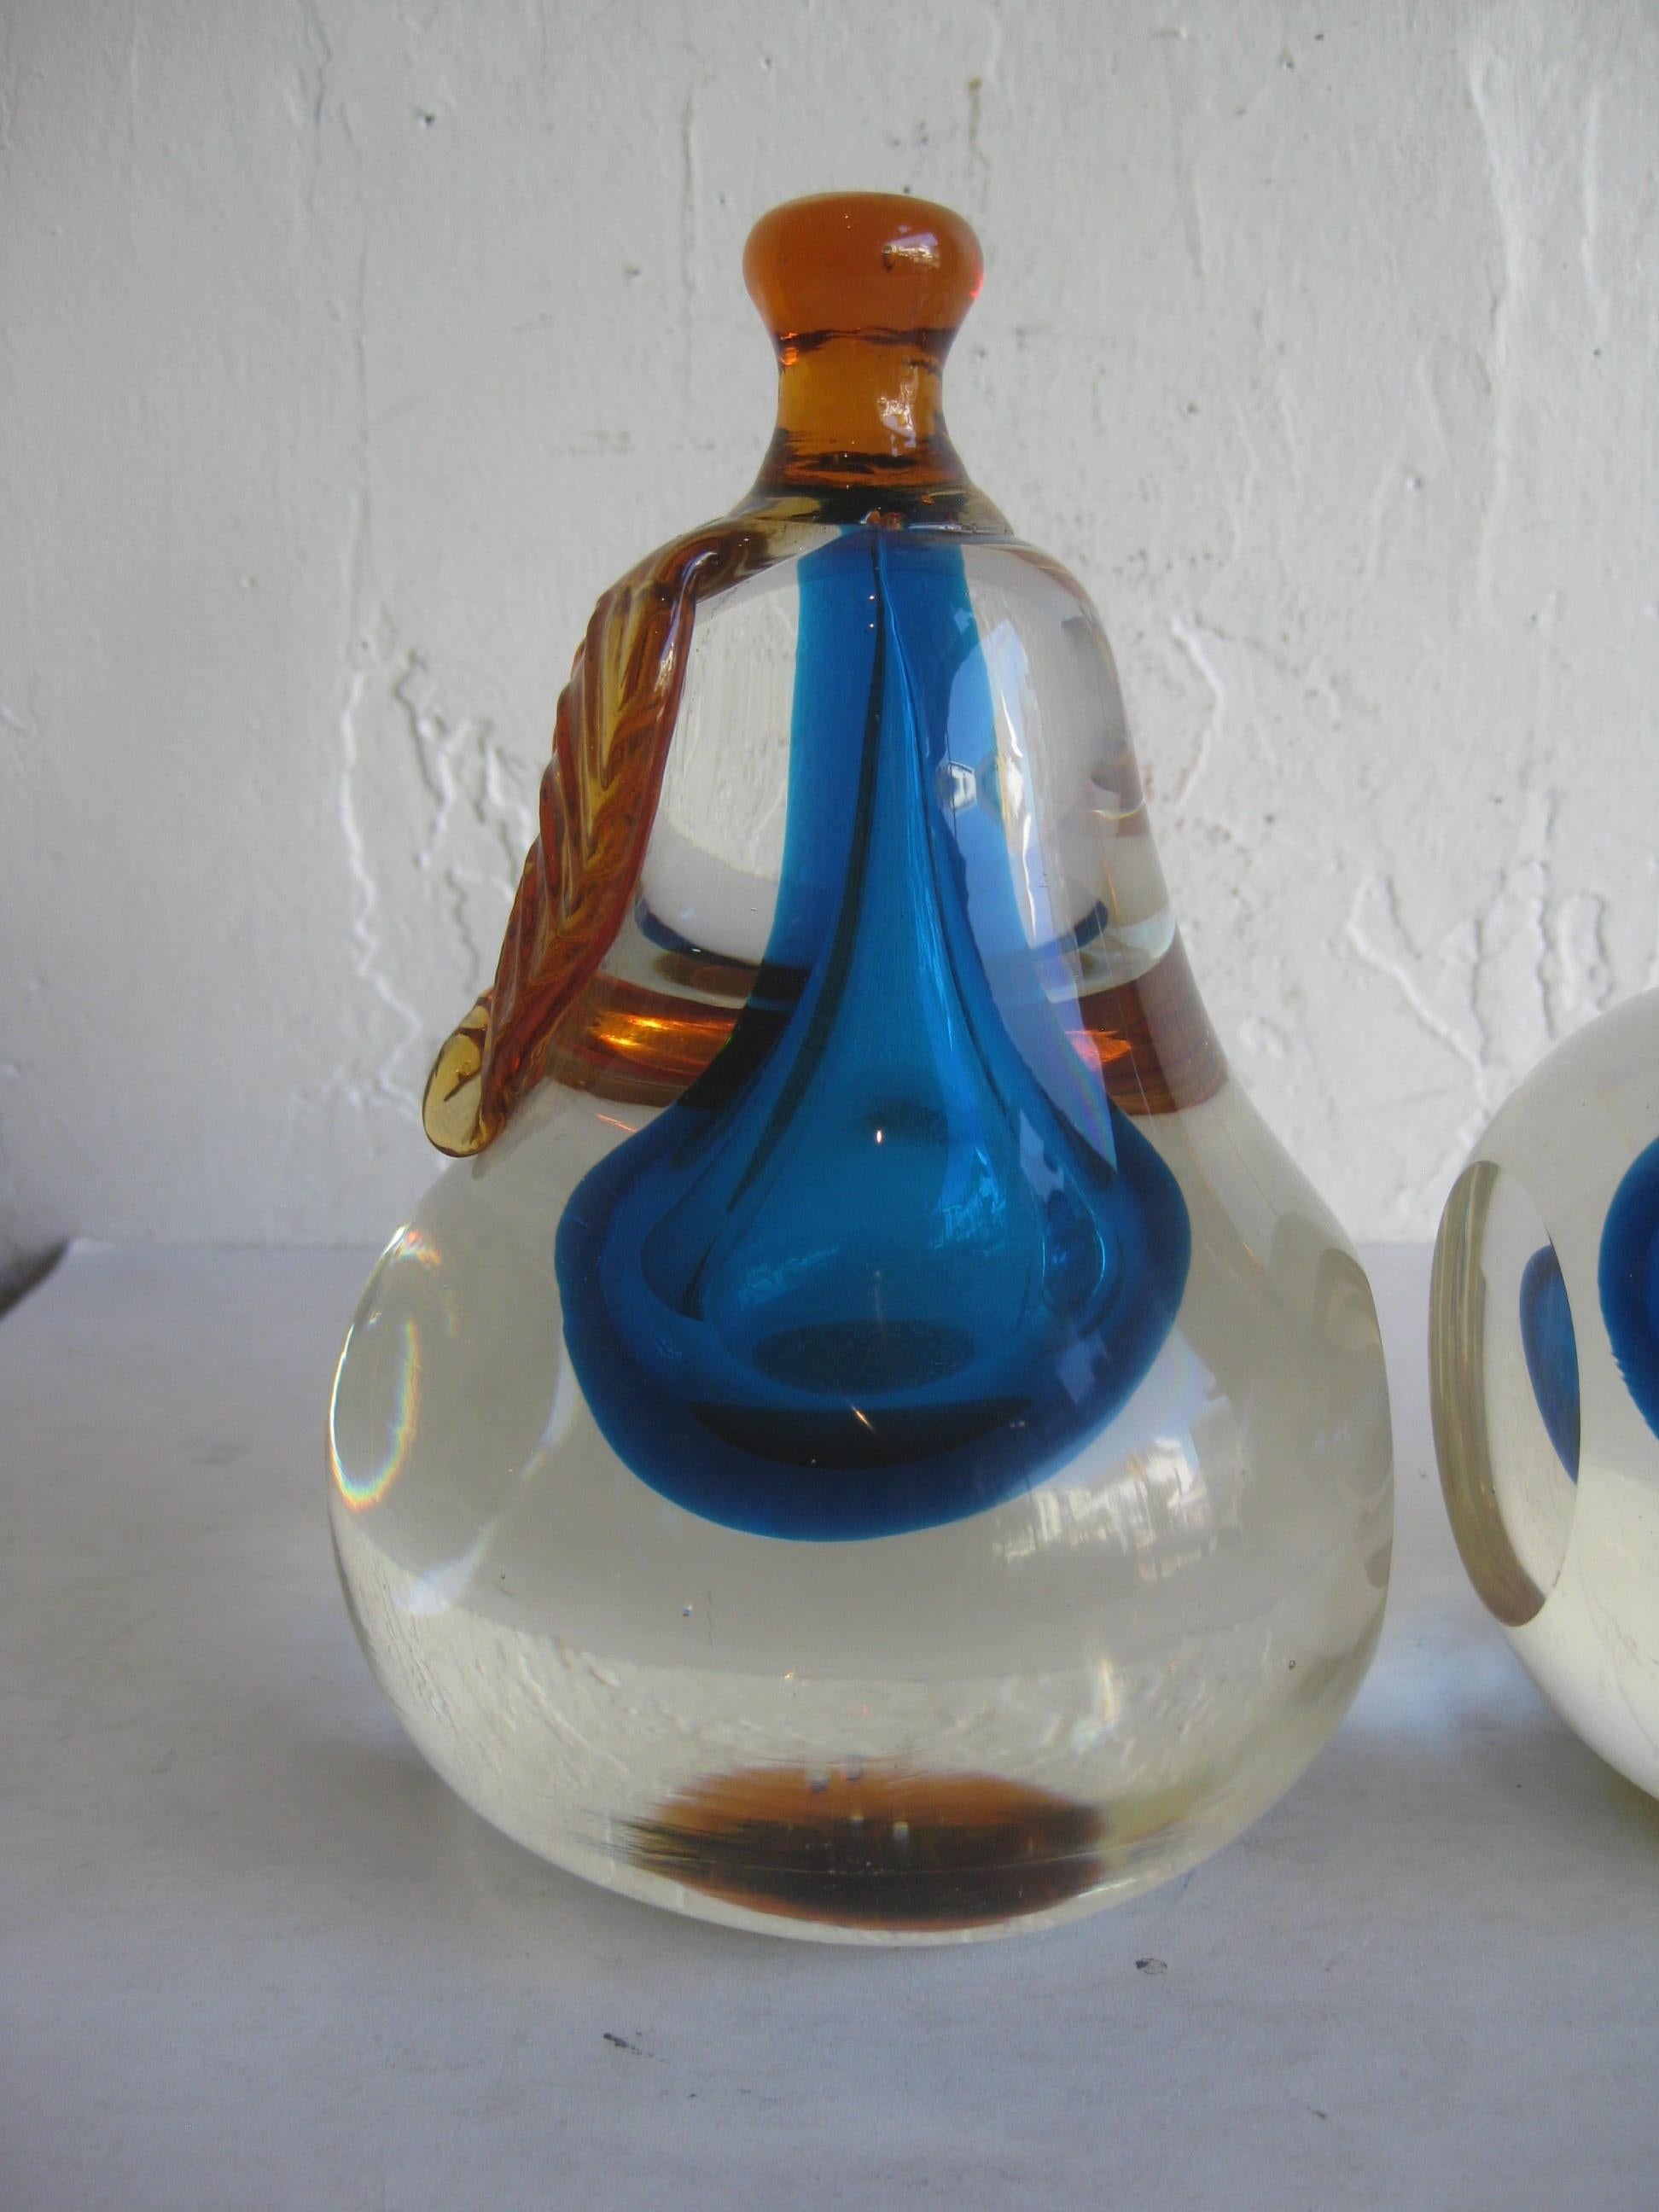 Beautiful set of matched Venerian Murano art glass Sommerso pear and apple bookends designed by Alfredo Barbini. These feature clear, blue and orange glass. They have one flat edge where they hold books. In excellent condition with no issues. Larger